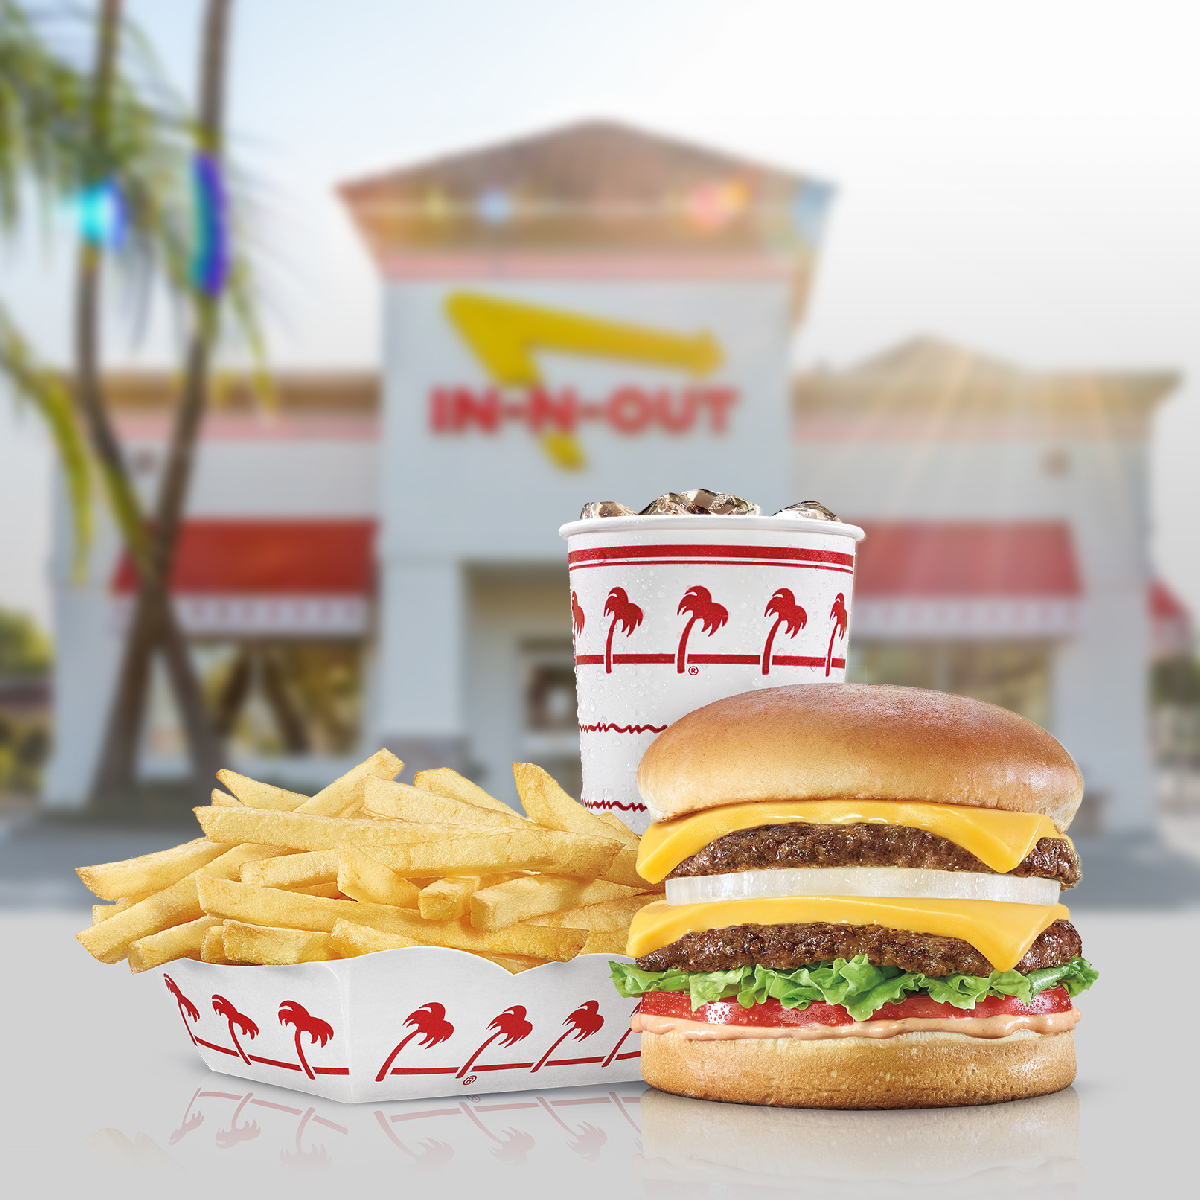 In-N-Out Burger Possibly Building New Location in Peoria